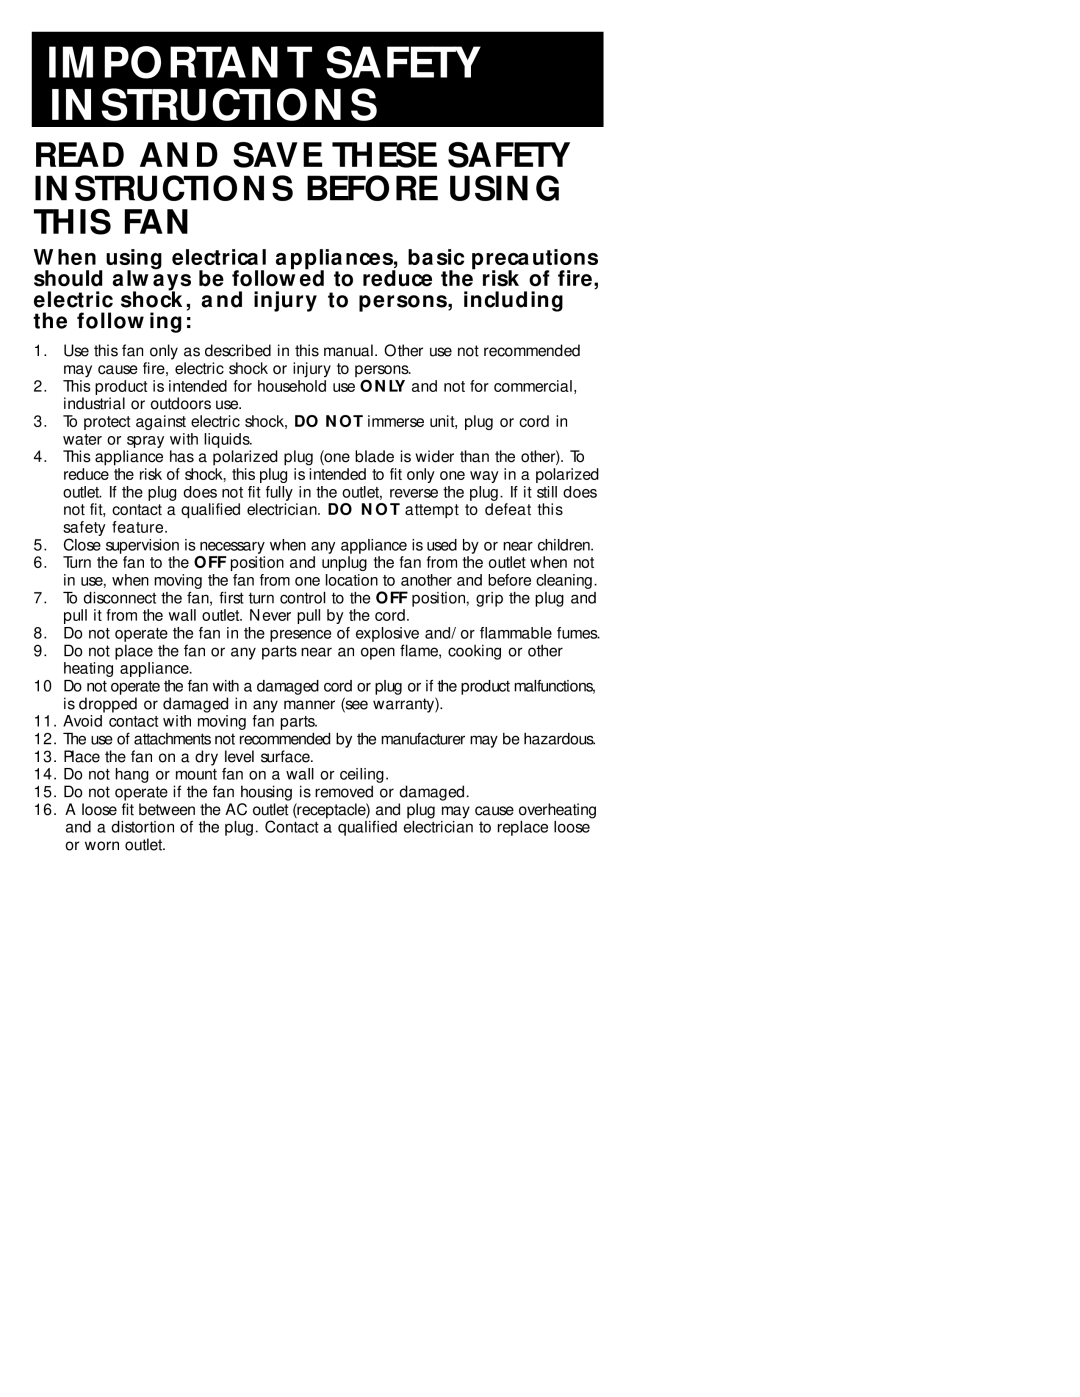 Honeywell HW-400C Series Important Safety Instructions, Read And Save These Safety Instructions Before Using This Fan 